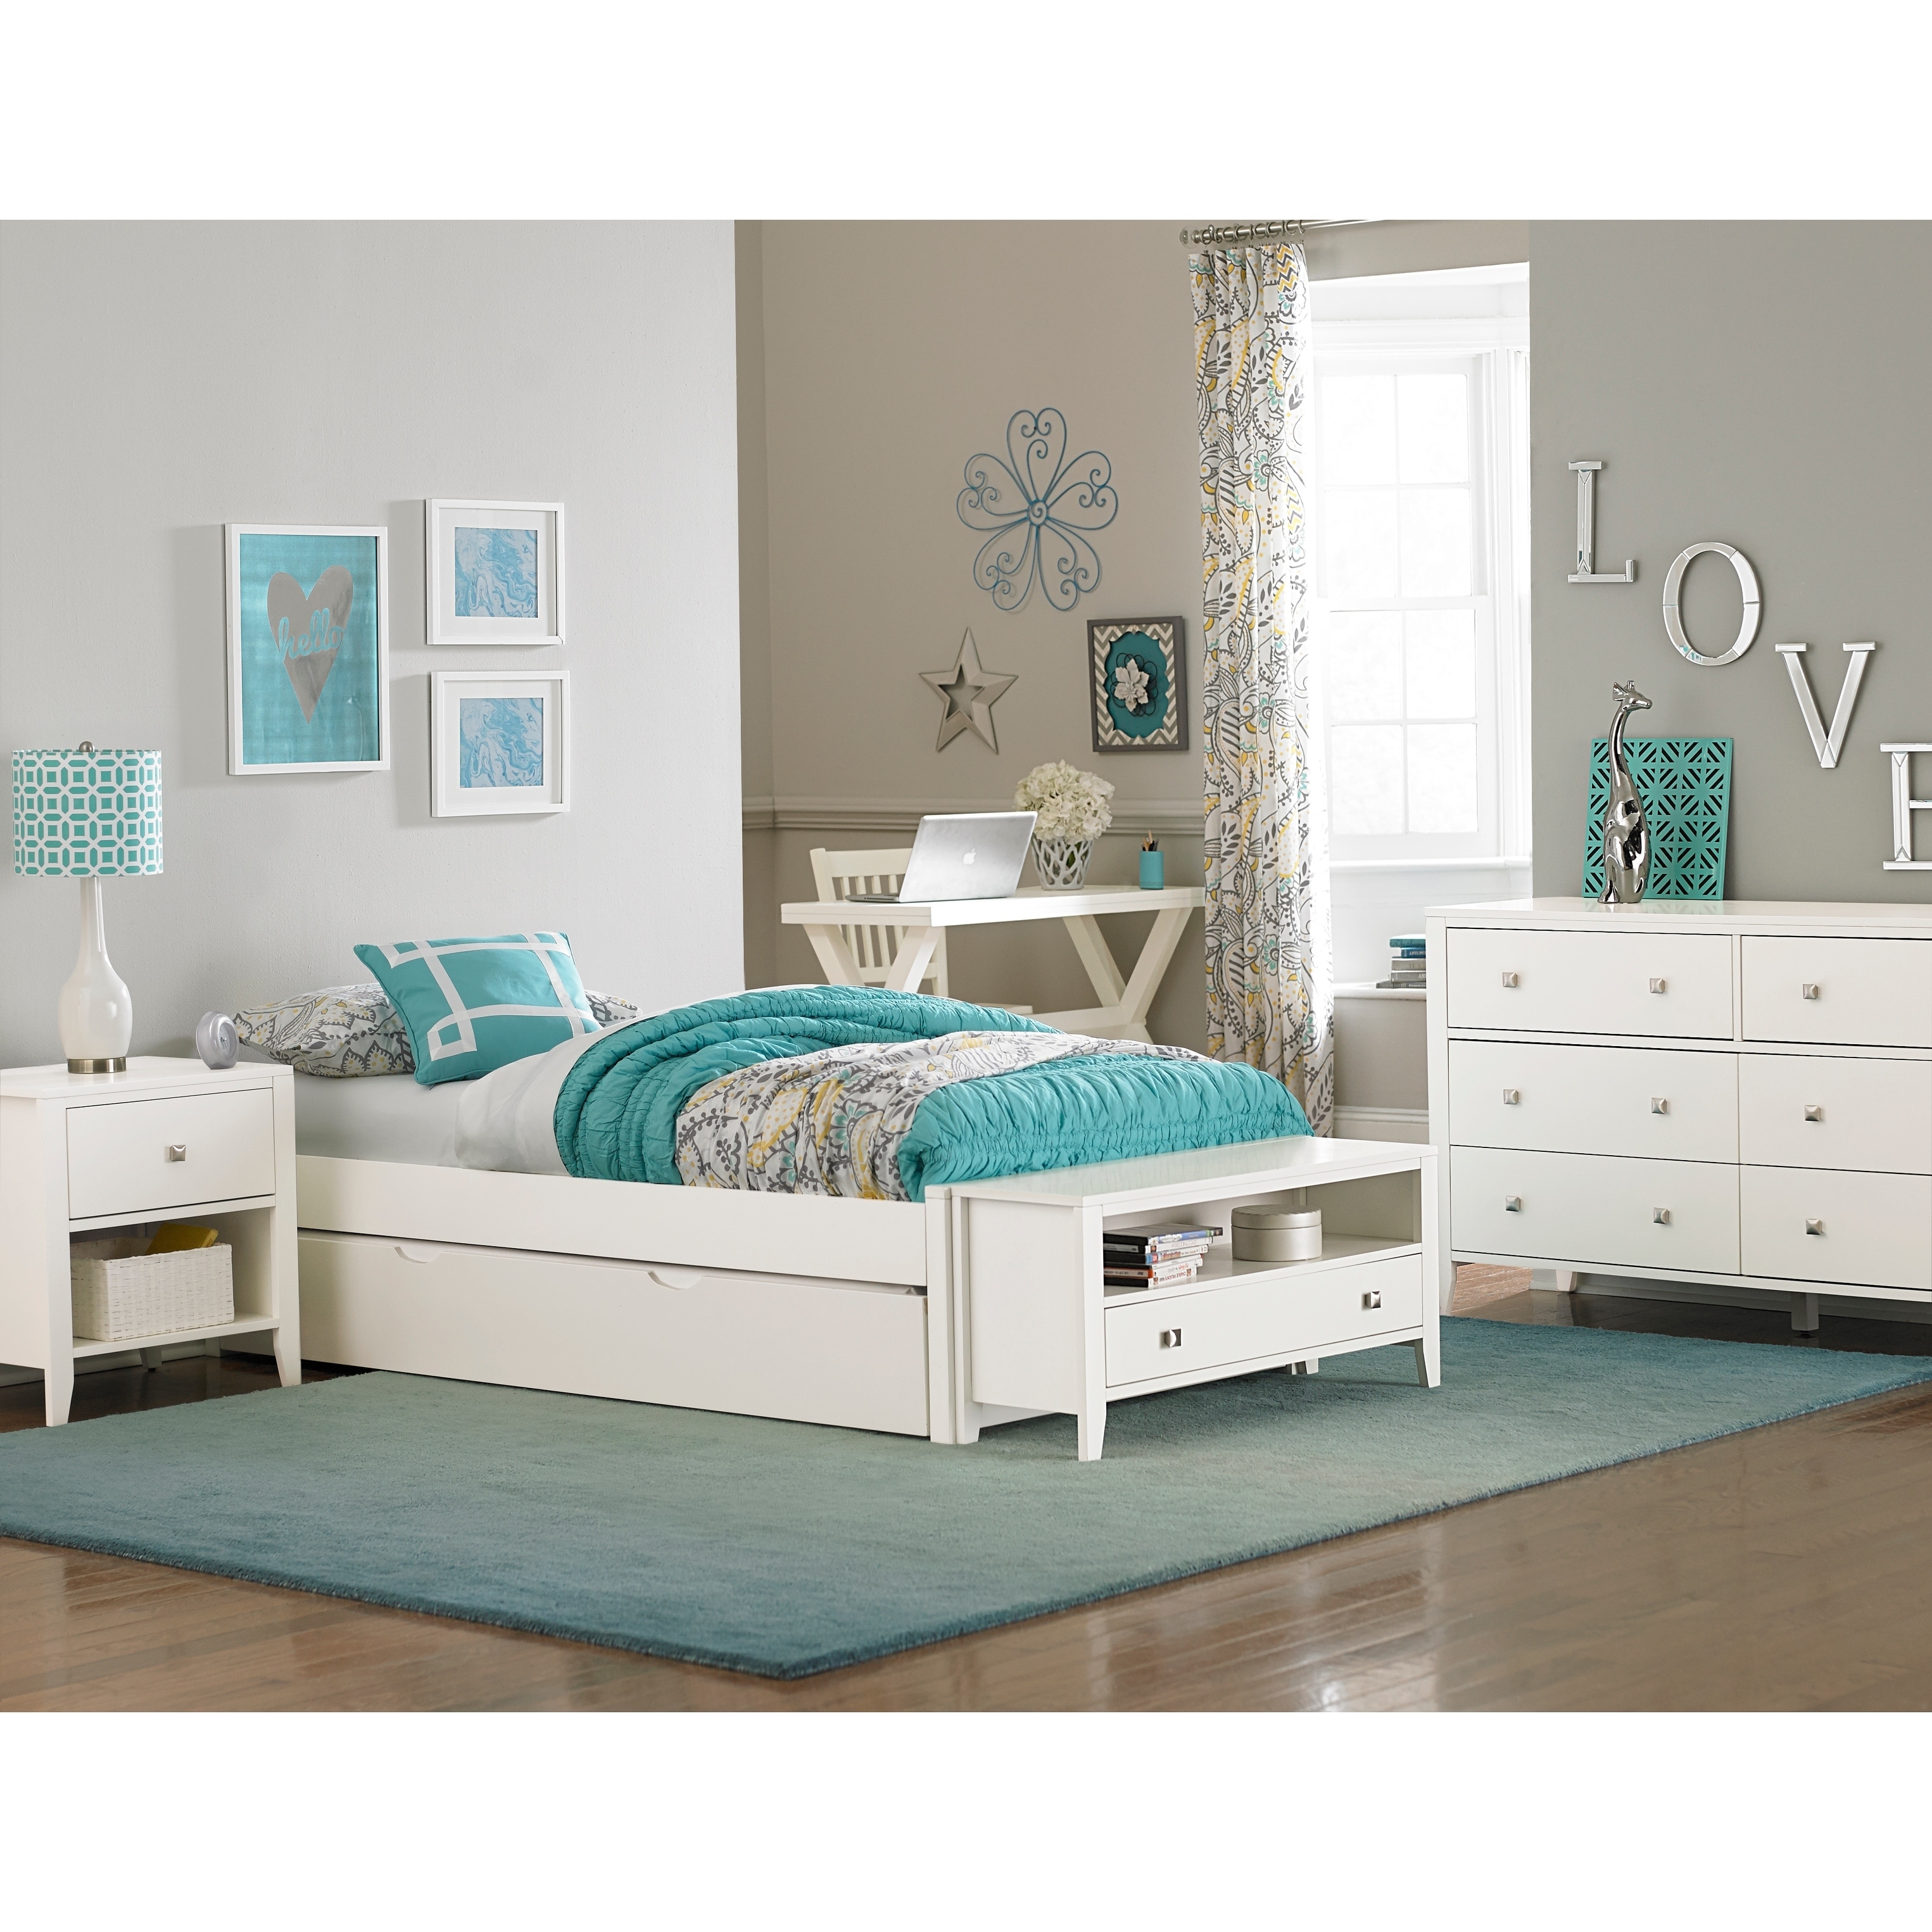 Hillsdale Pulse Twin Platform Bed With Trundle White On Sale Overstock 18692463